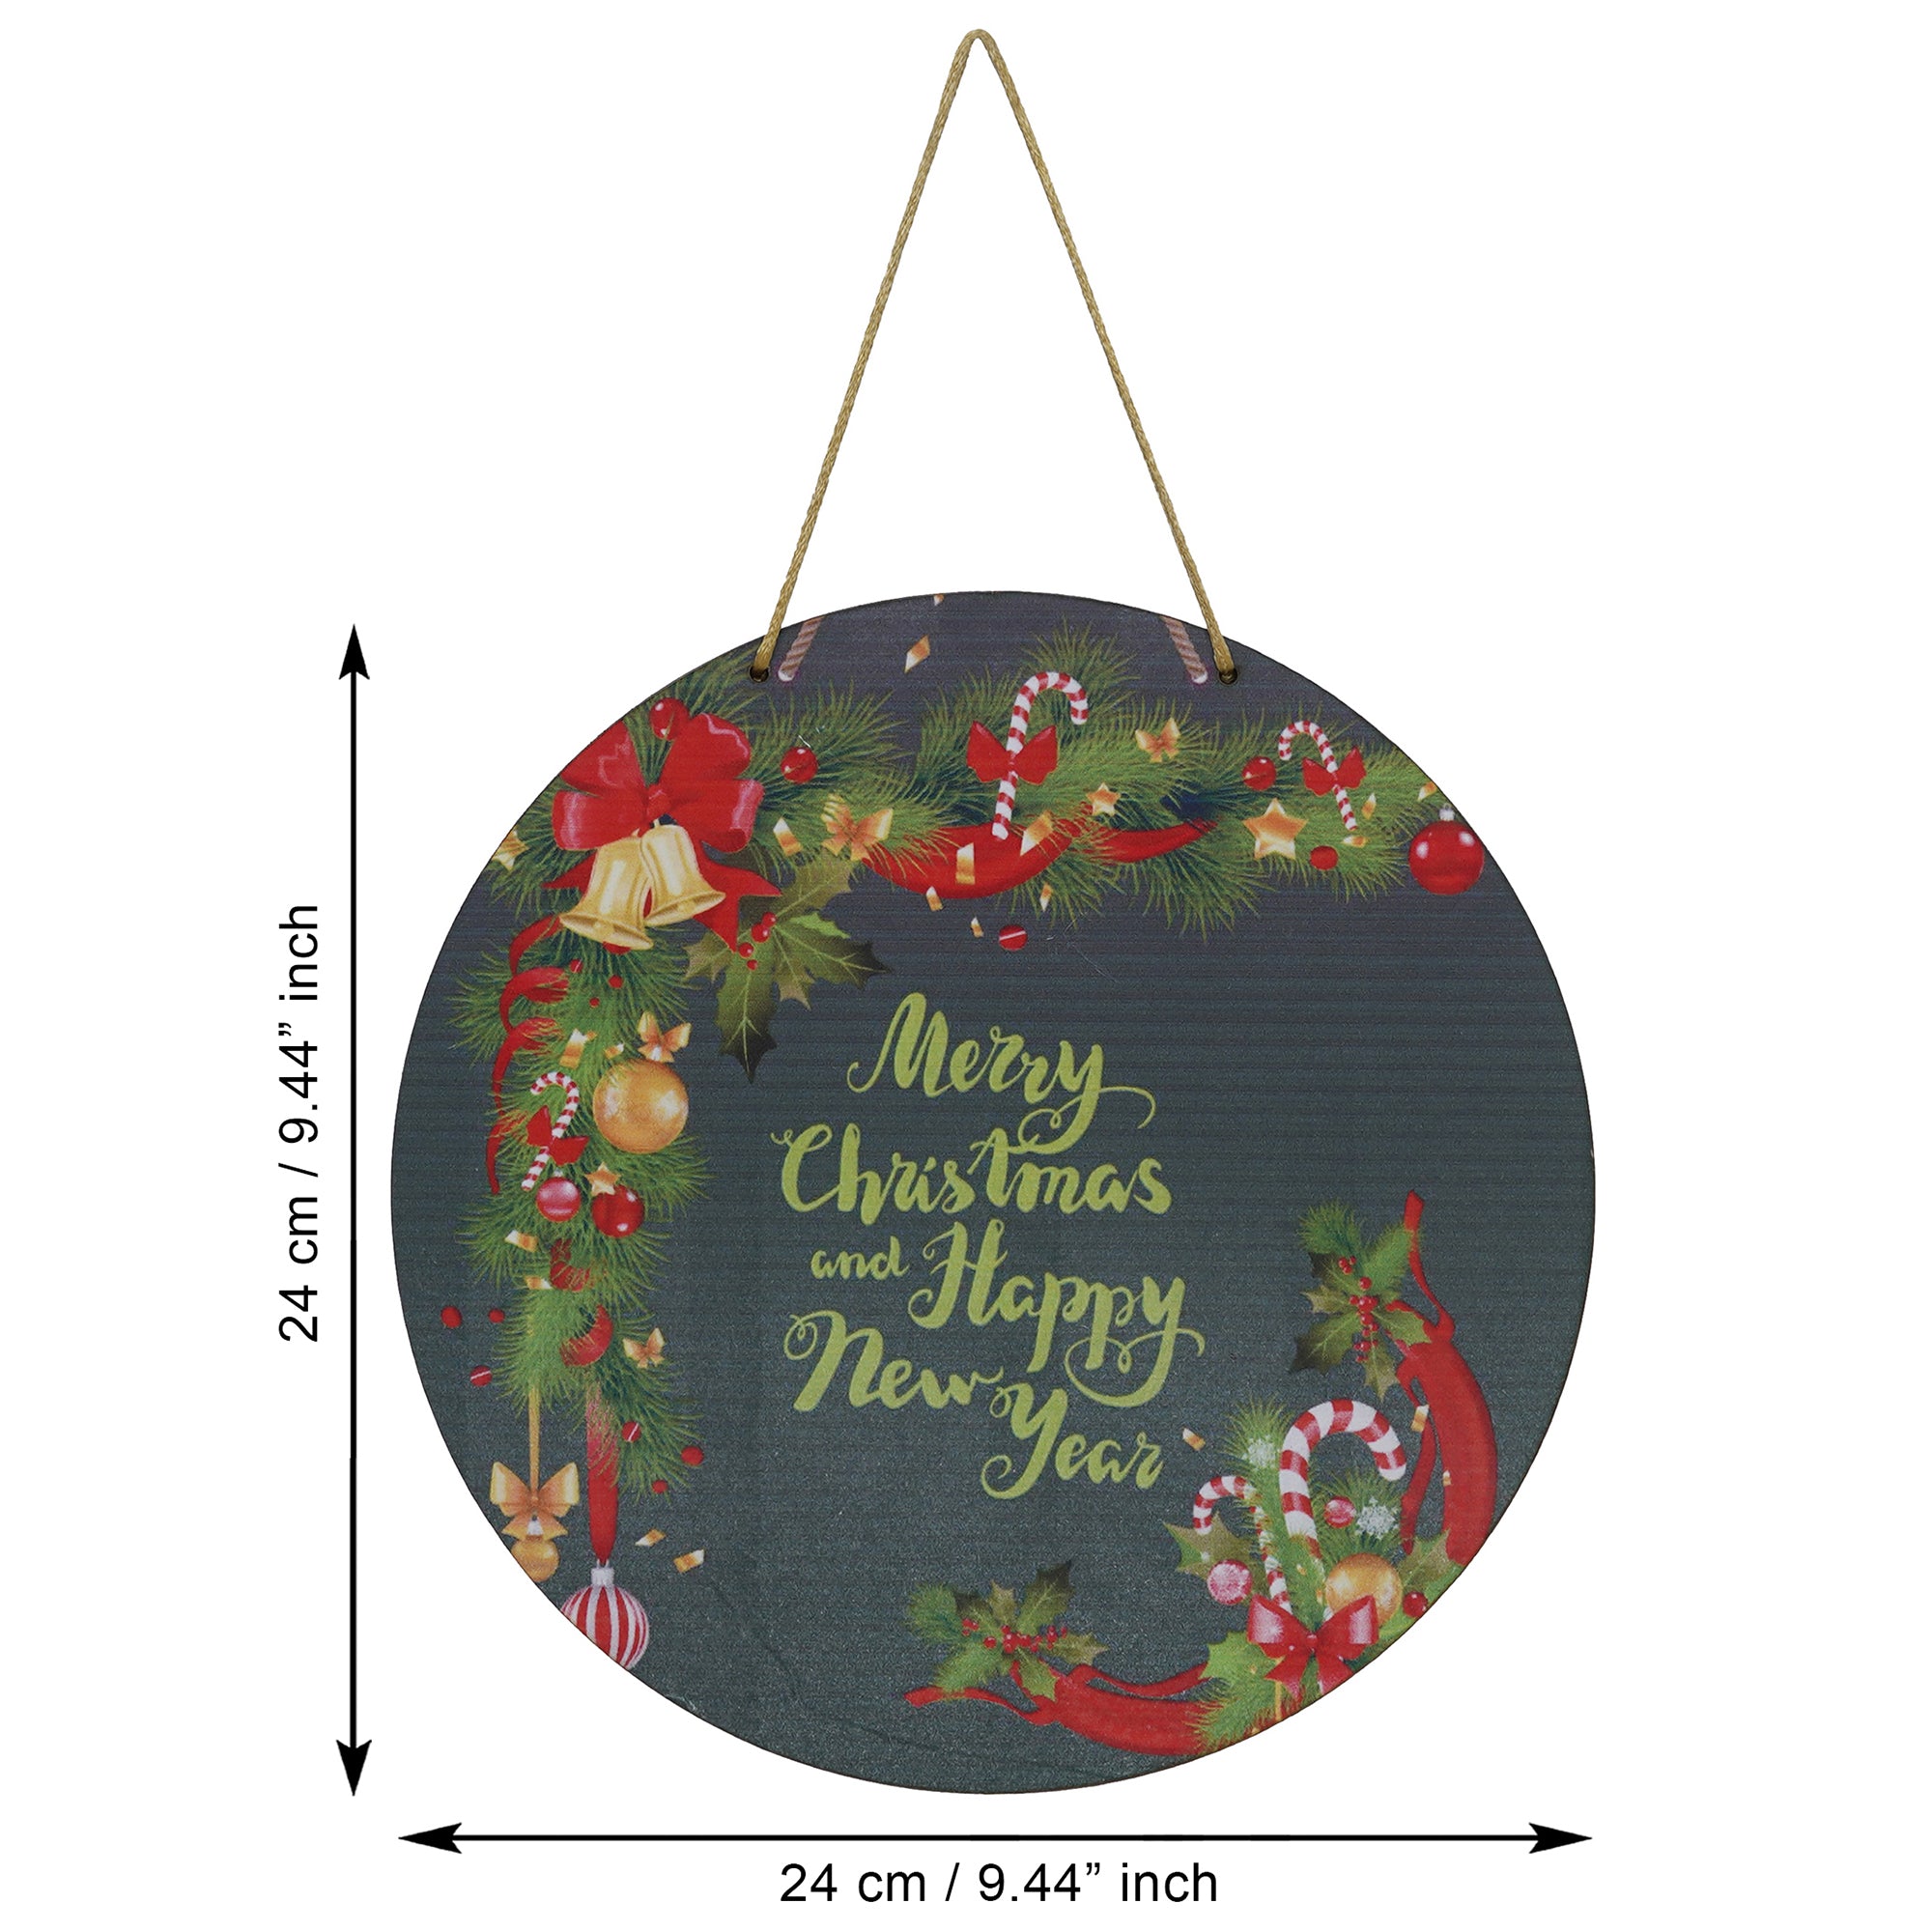 eCraftIndia "Merry Christmas and Happy New Year" Printed Wall/Door Hanging for Home and Christmas Decorations (Green, Red, Golden) 3